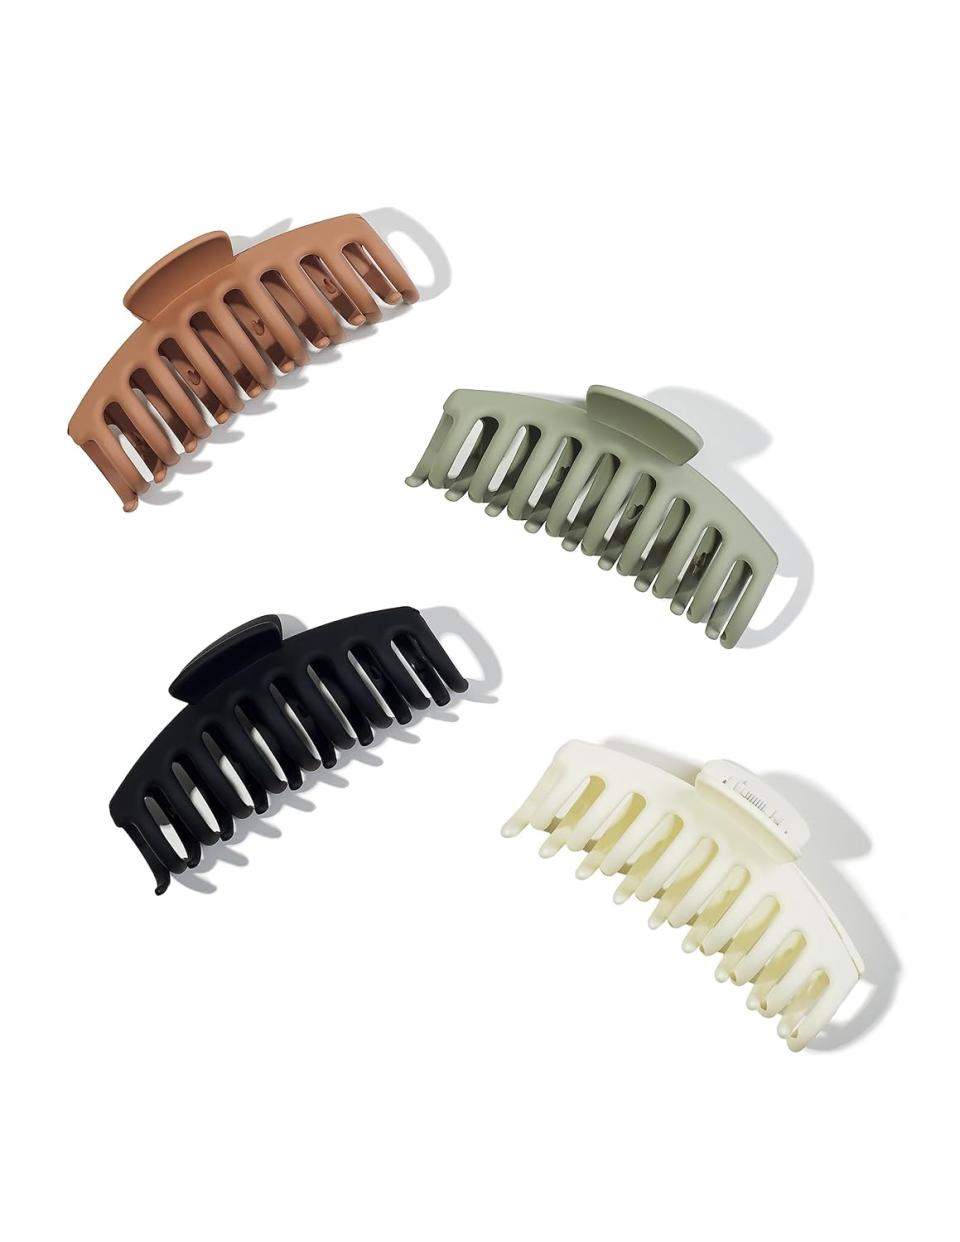 Four claw clips in brown, green, black and cream.